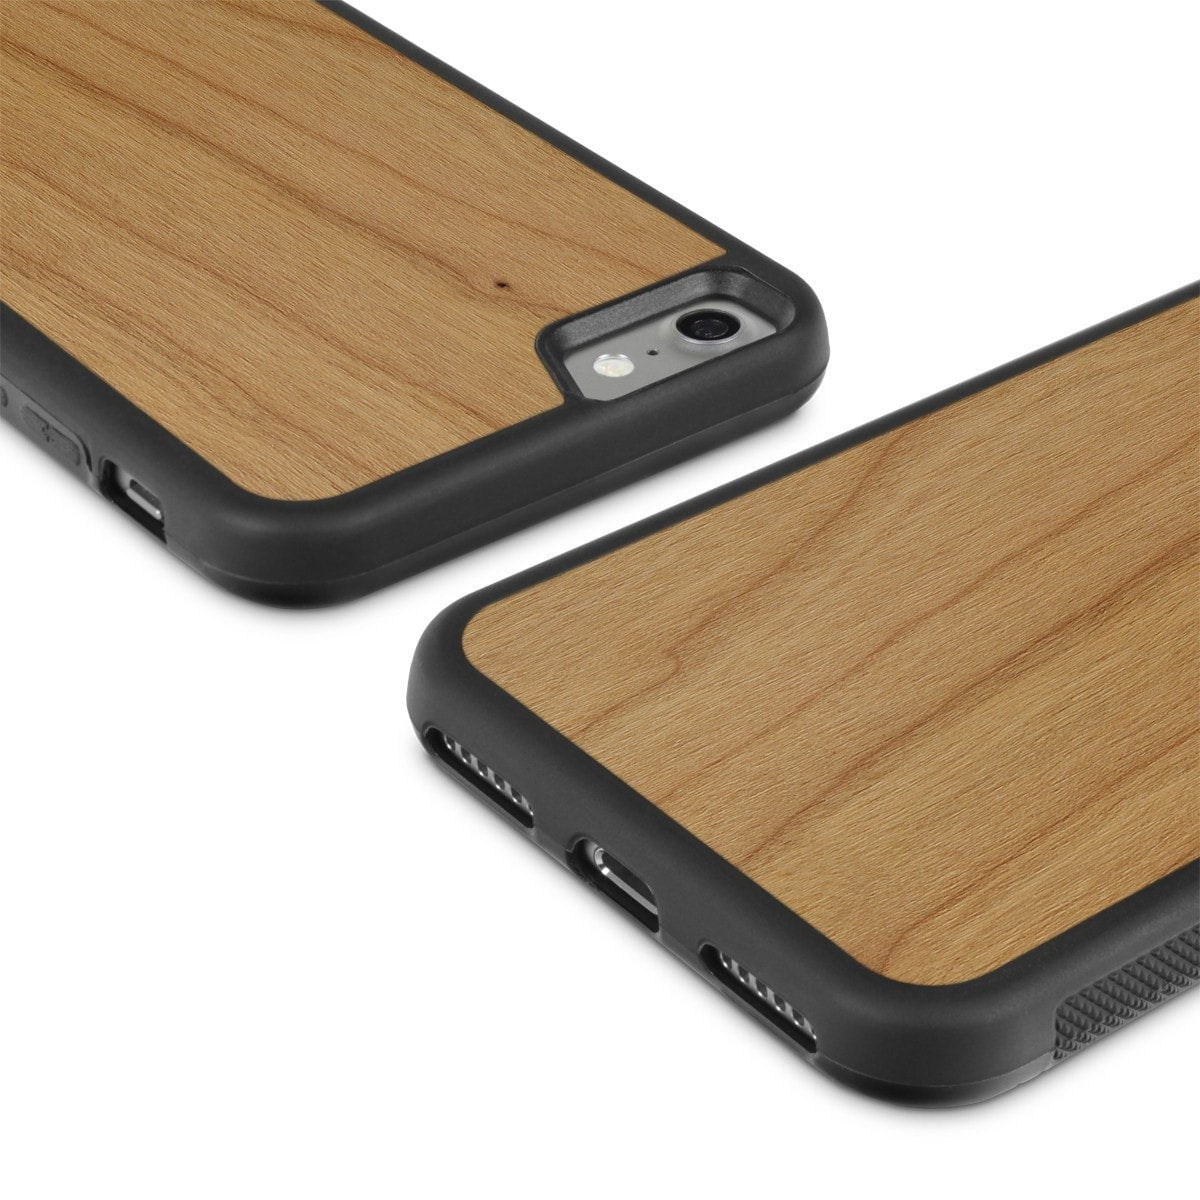  iPhone 7 —  #WoodBack Explorer Case - Cover-Up - 6